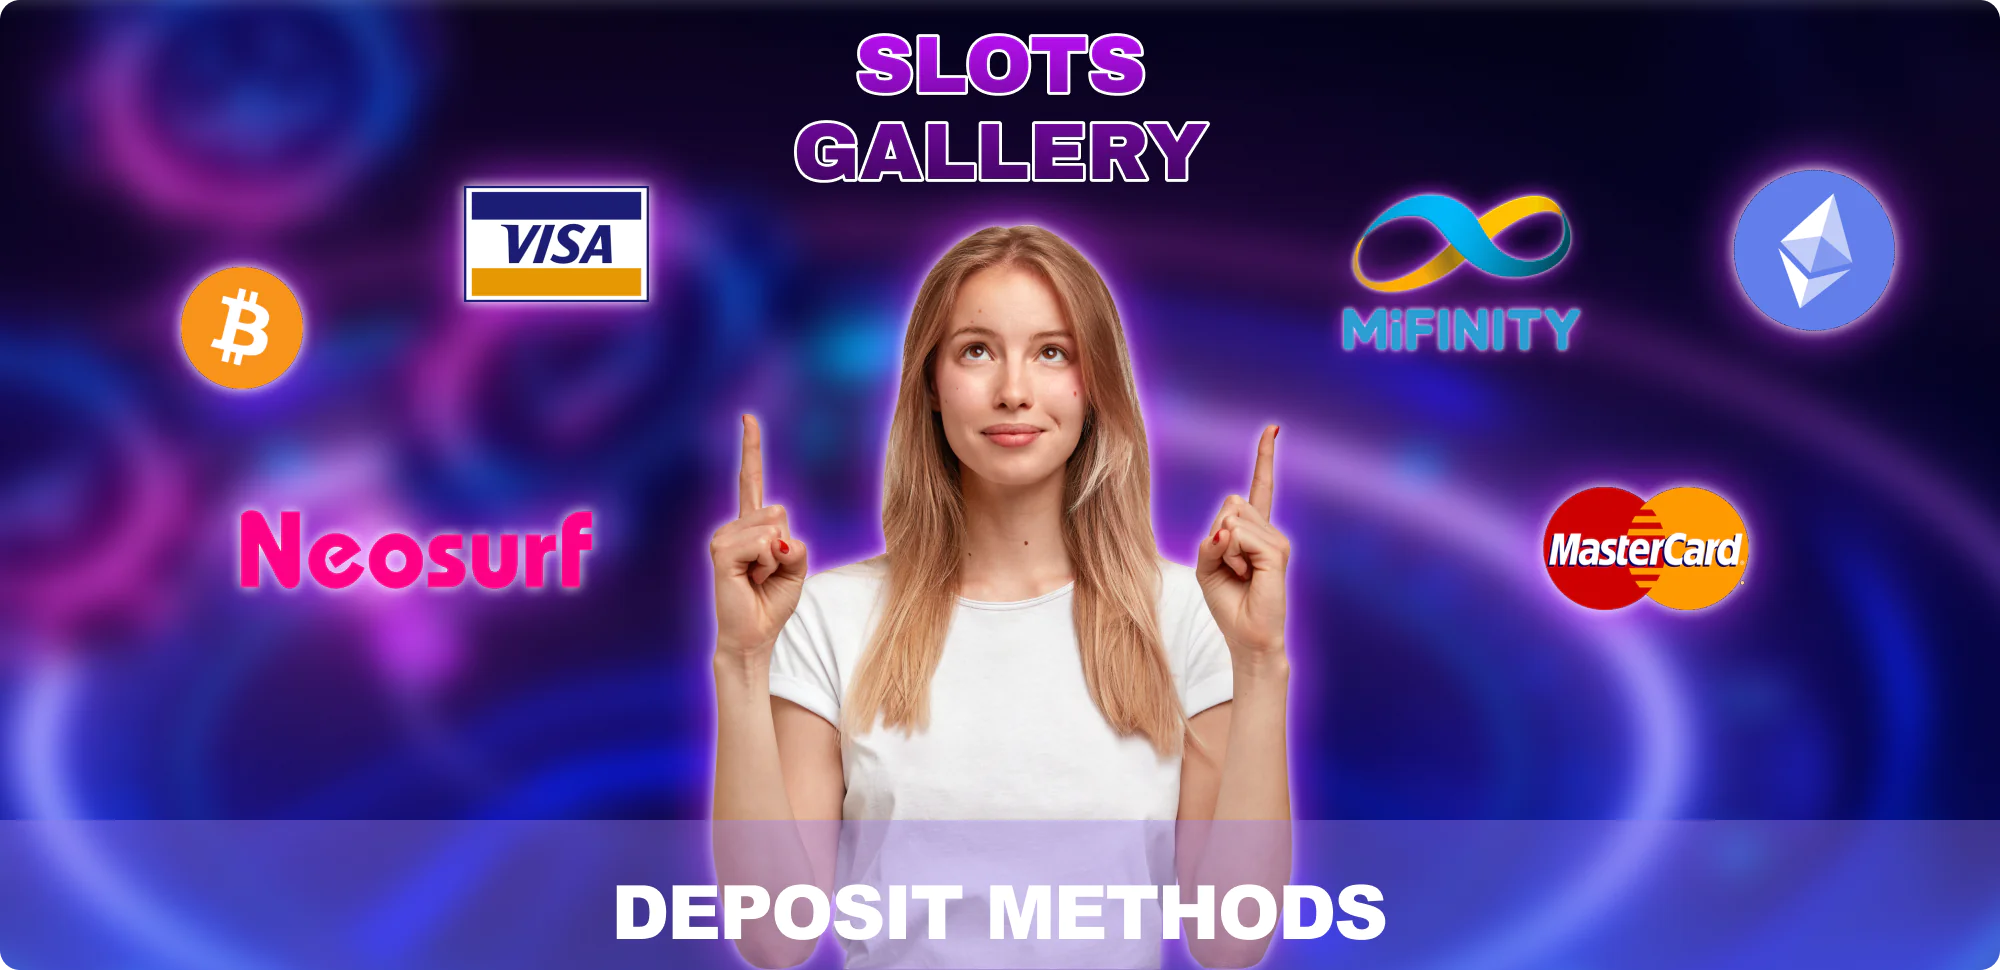 Slots Gallery New Zealand - available deposit methods